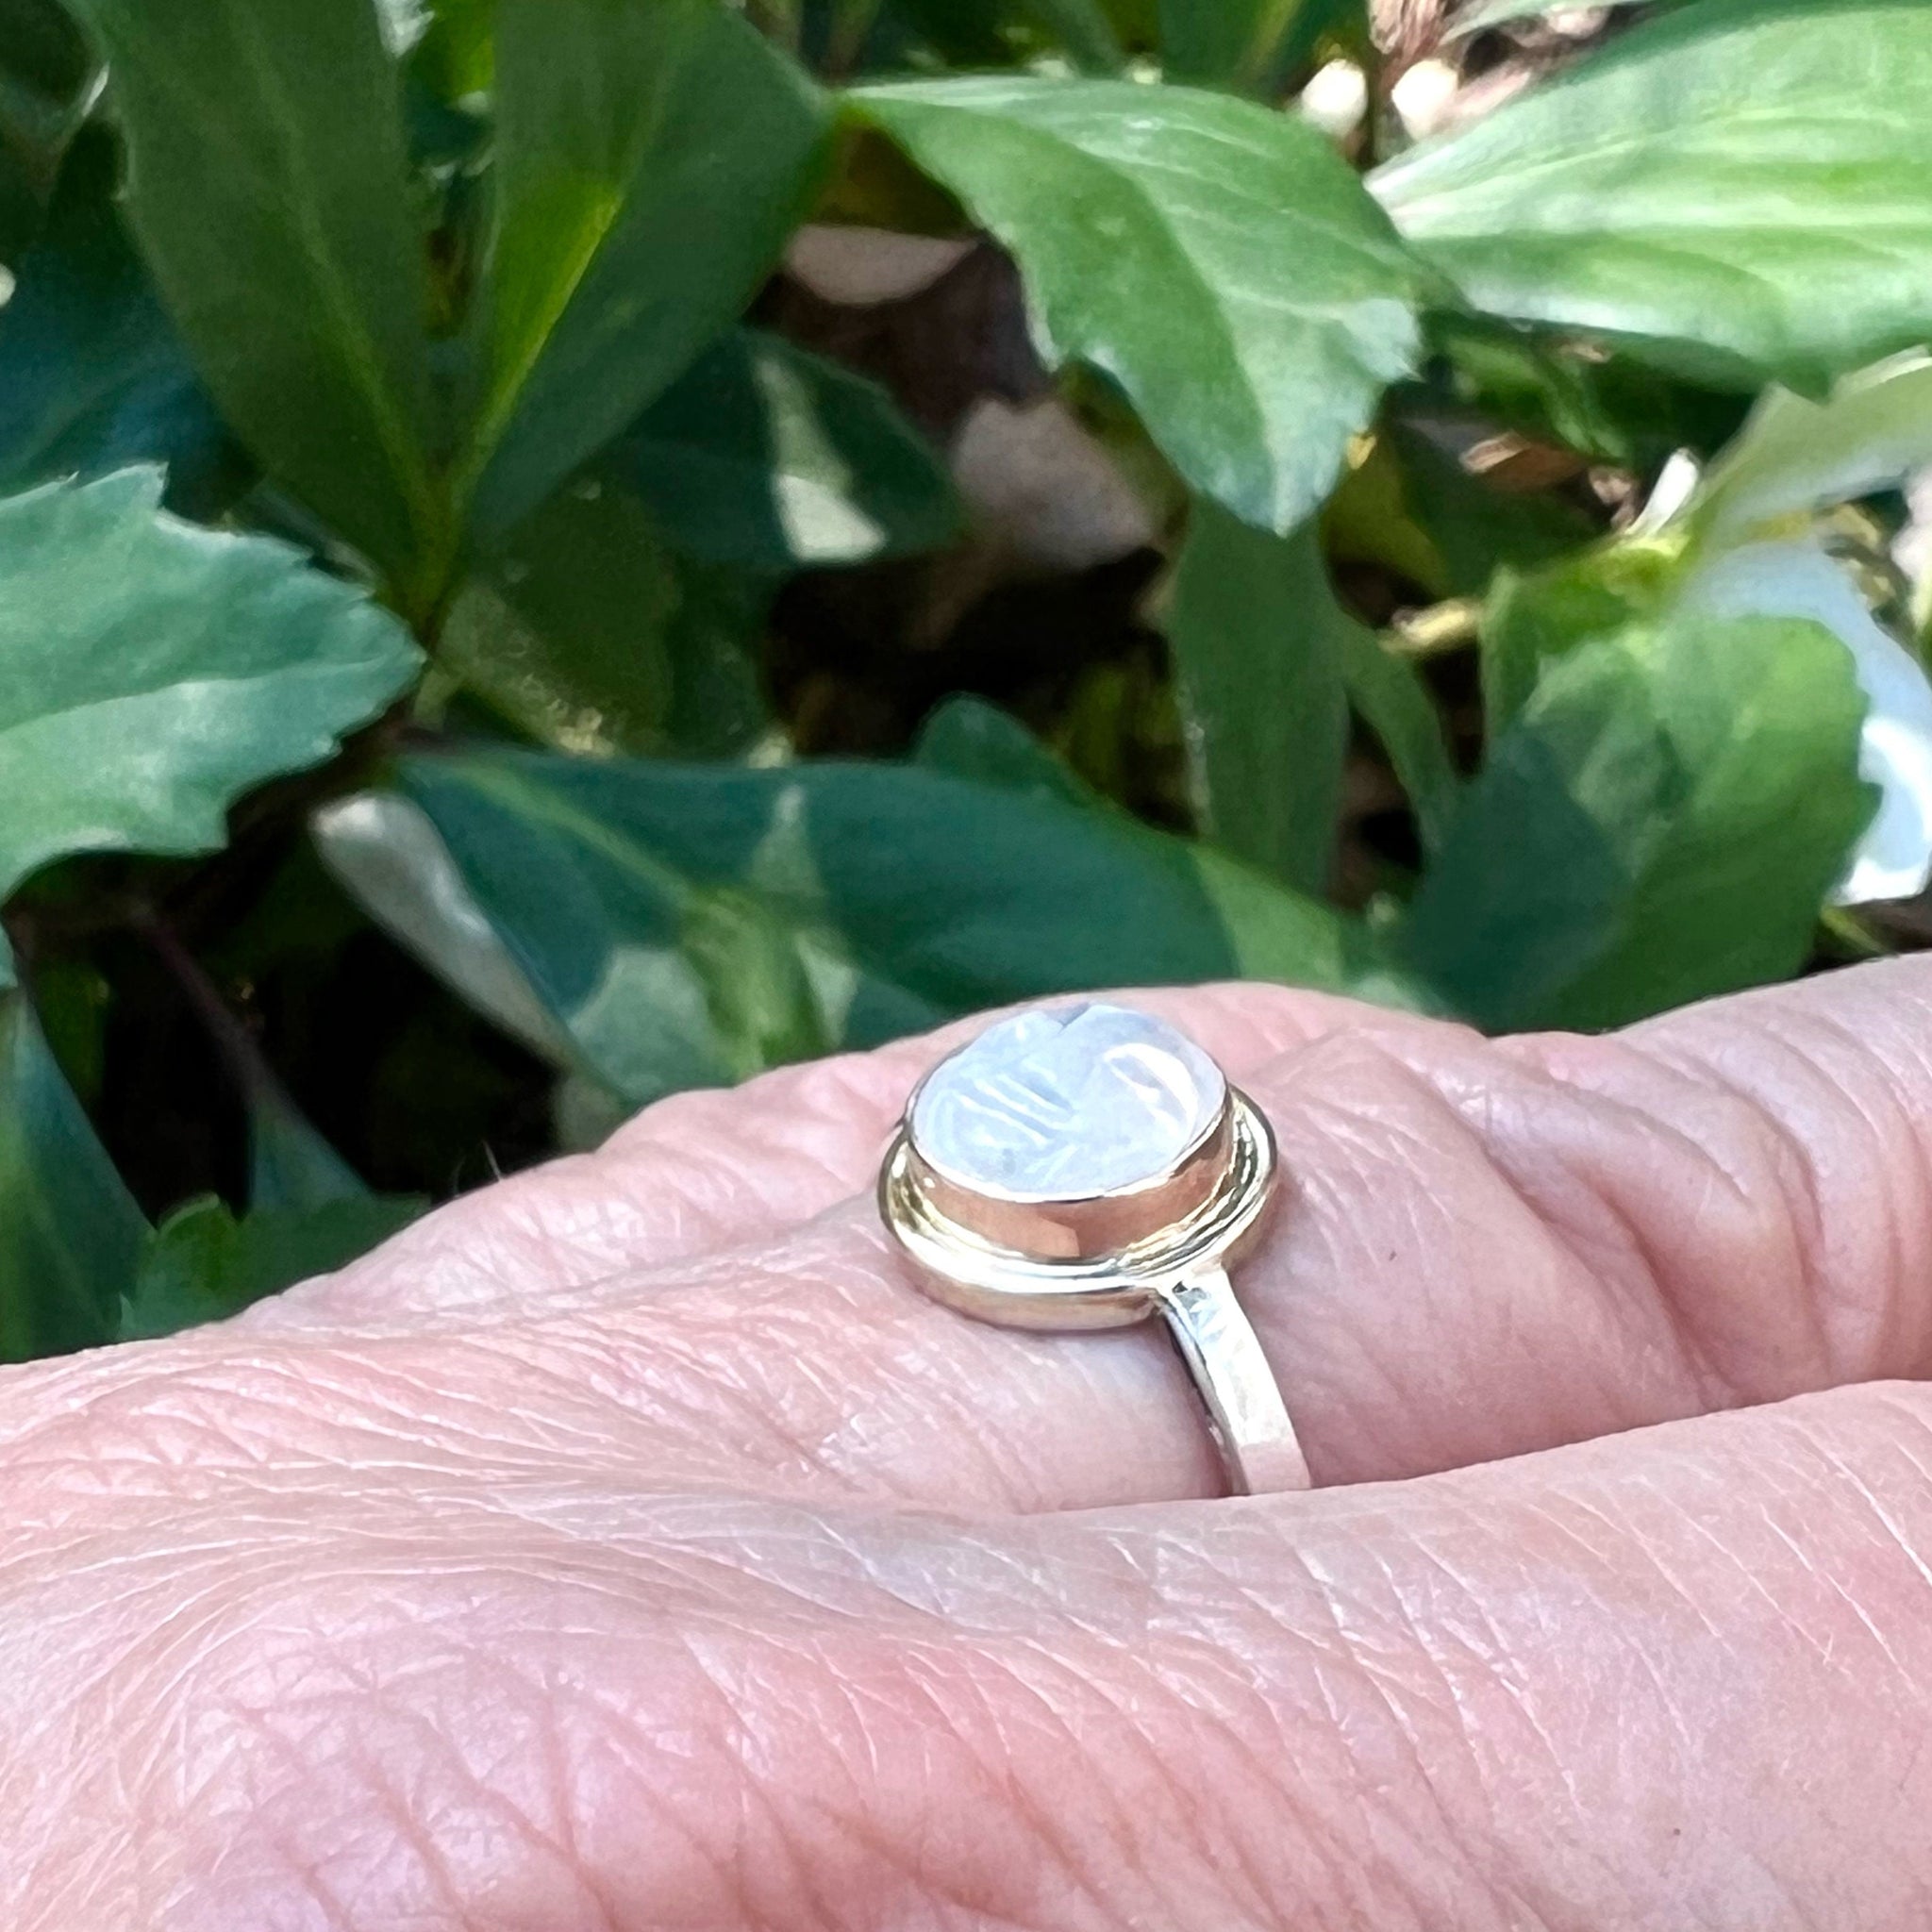 Carved Moonstone Ring In 14k Gold and Silver, Moon Face Ring, Rainbow Moonstone Ring